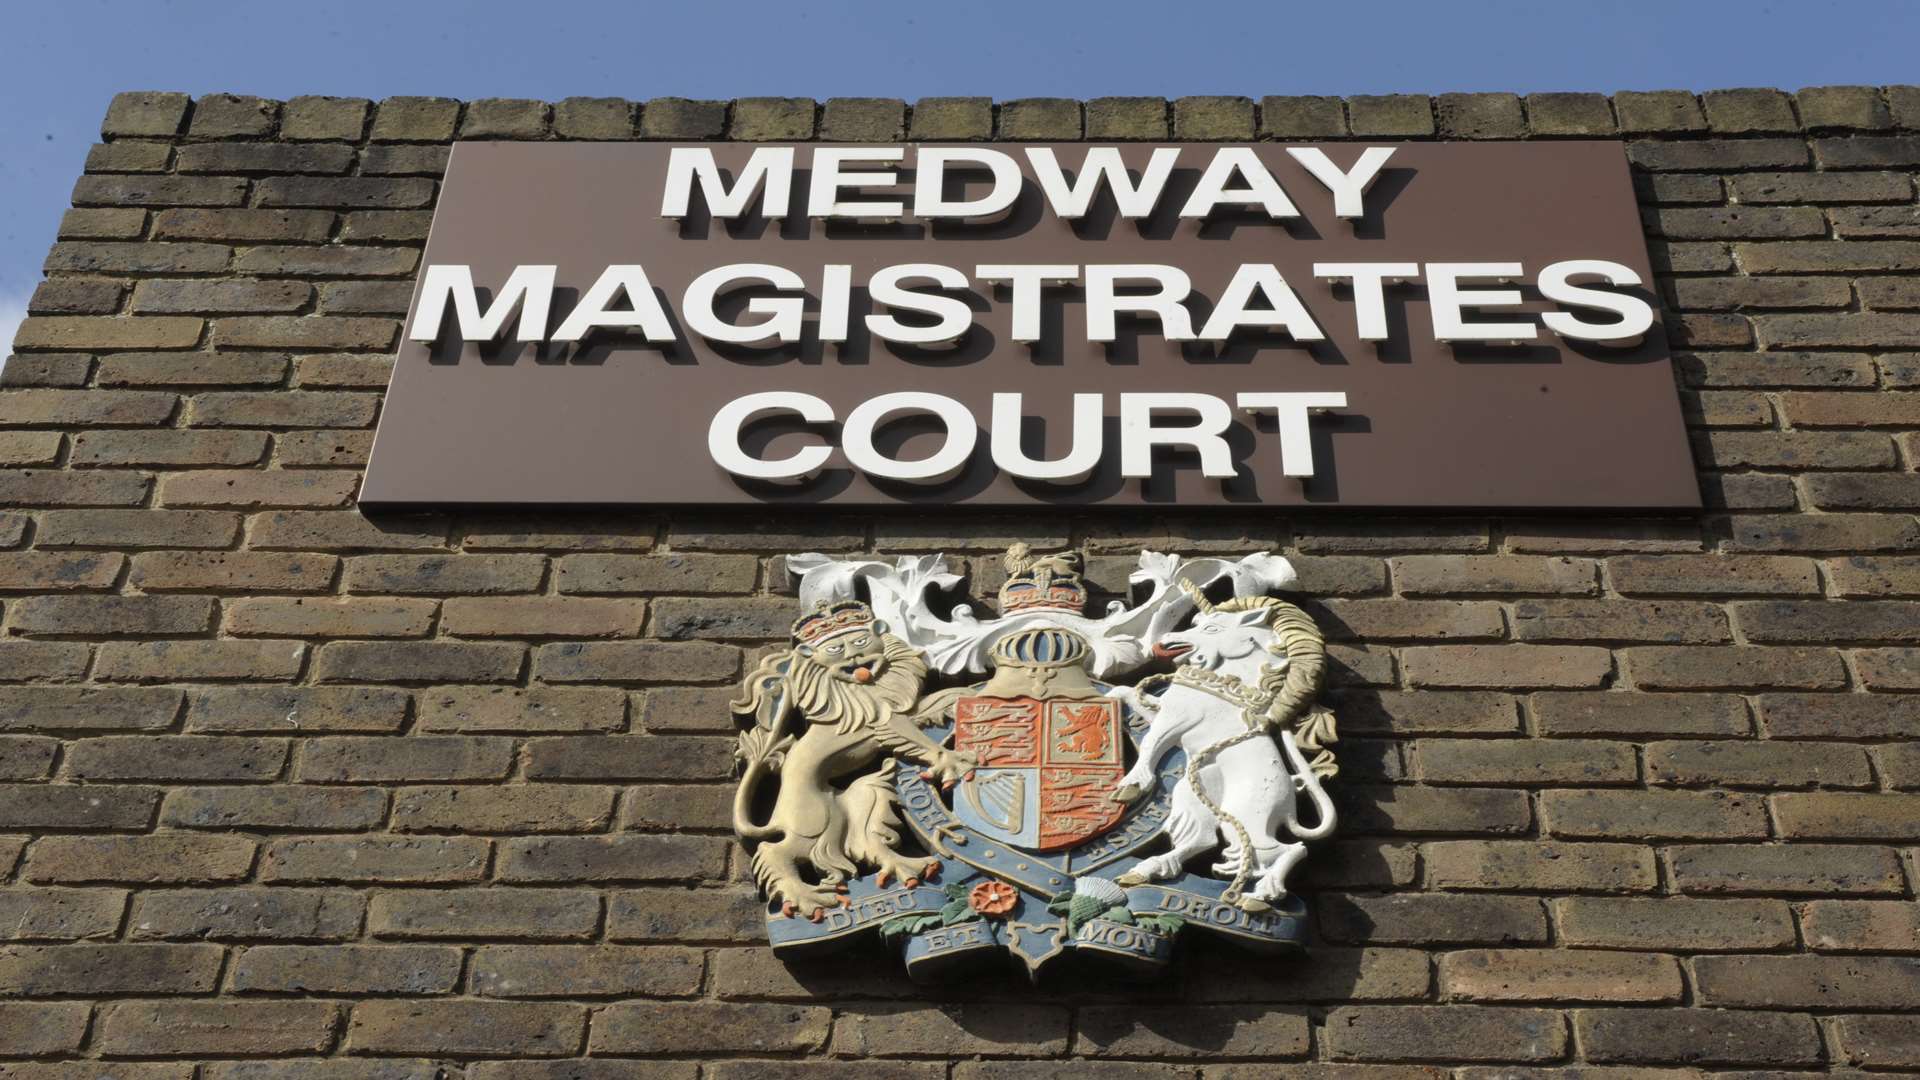 James Dennard is due to appear before Medway Magistrates Court on Tuesday, January 16.